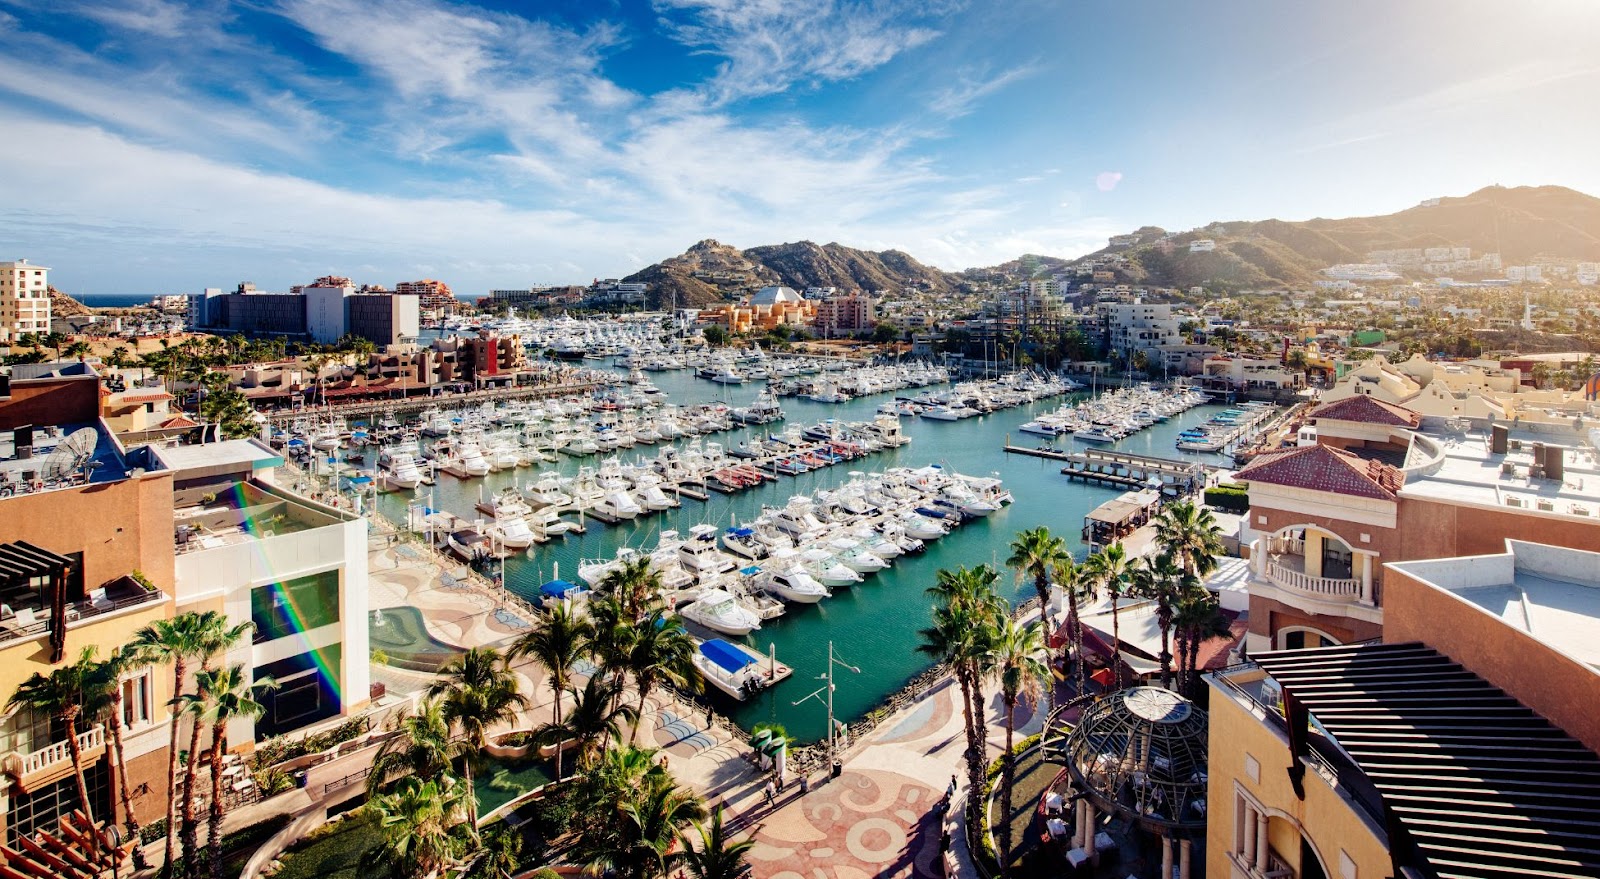 Quiet morning shot of the marina in Cabo San Lucas